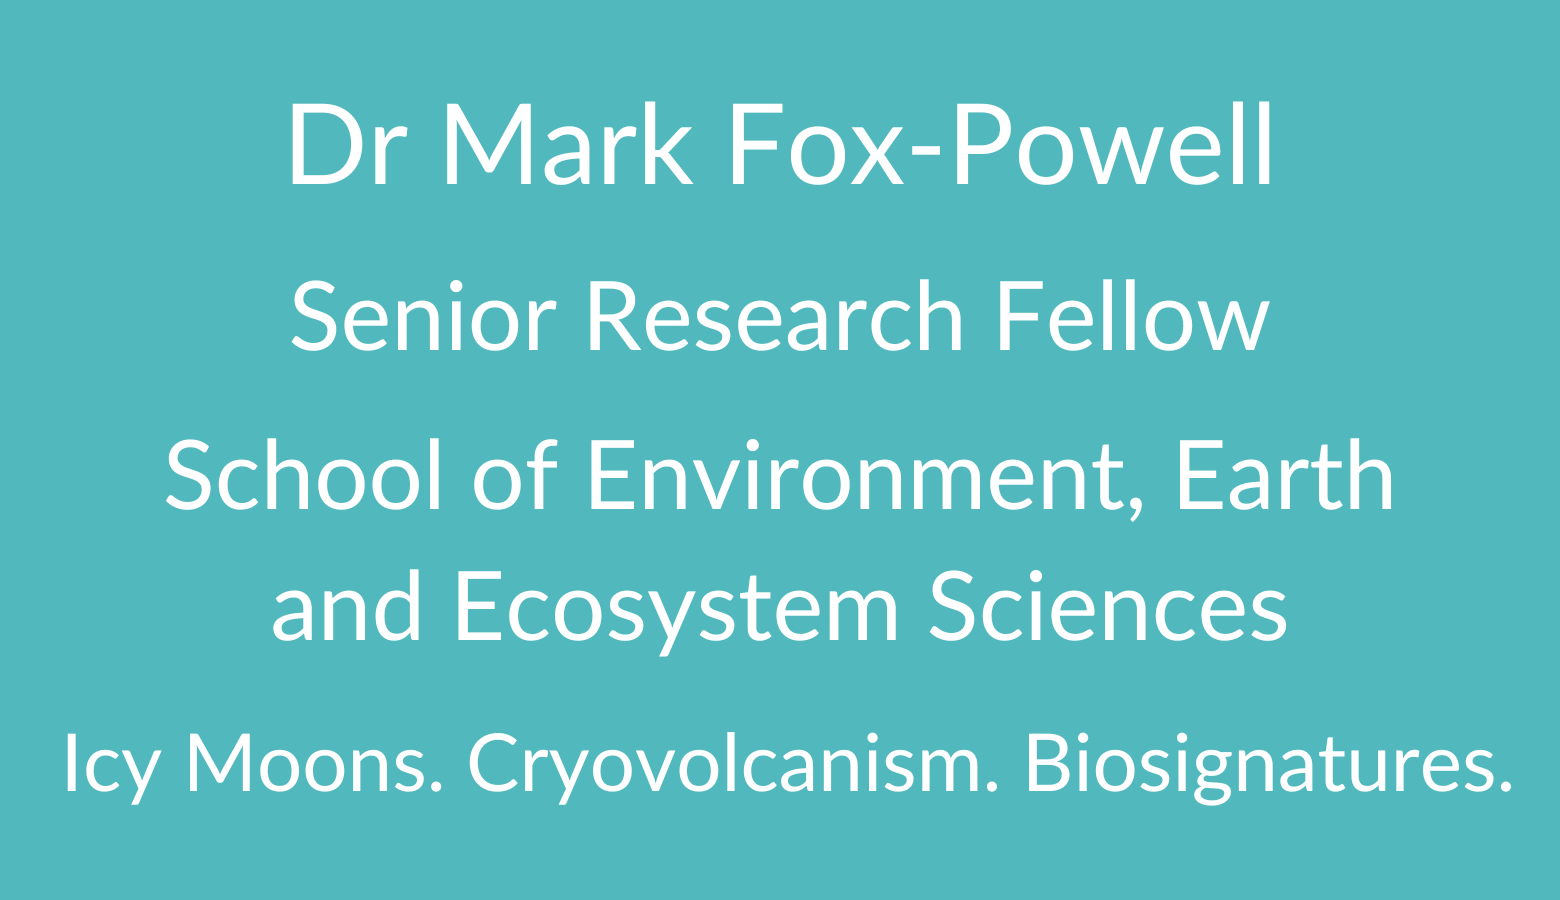 Dr Mark Fox-Powell. Senior Research Fellow. School of Environment, Earth and Ecosystem Sciences. Icy Moons. Cryovolcanism. Biosigniatures.